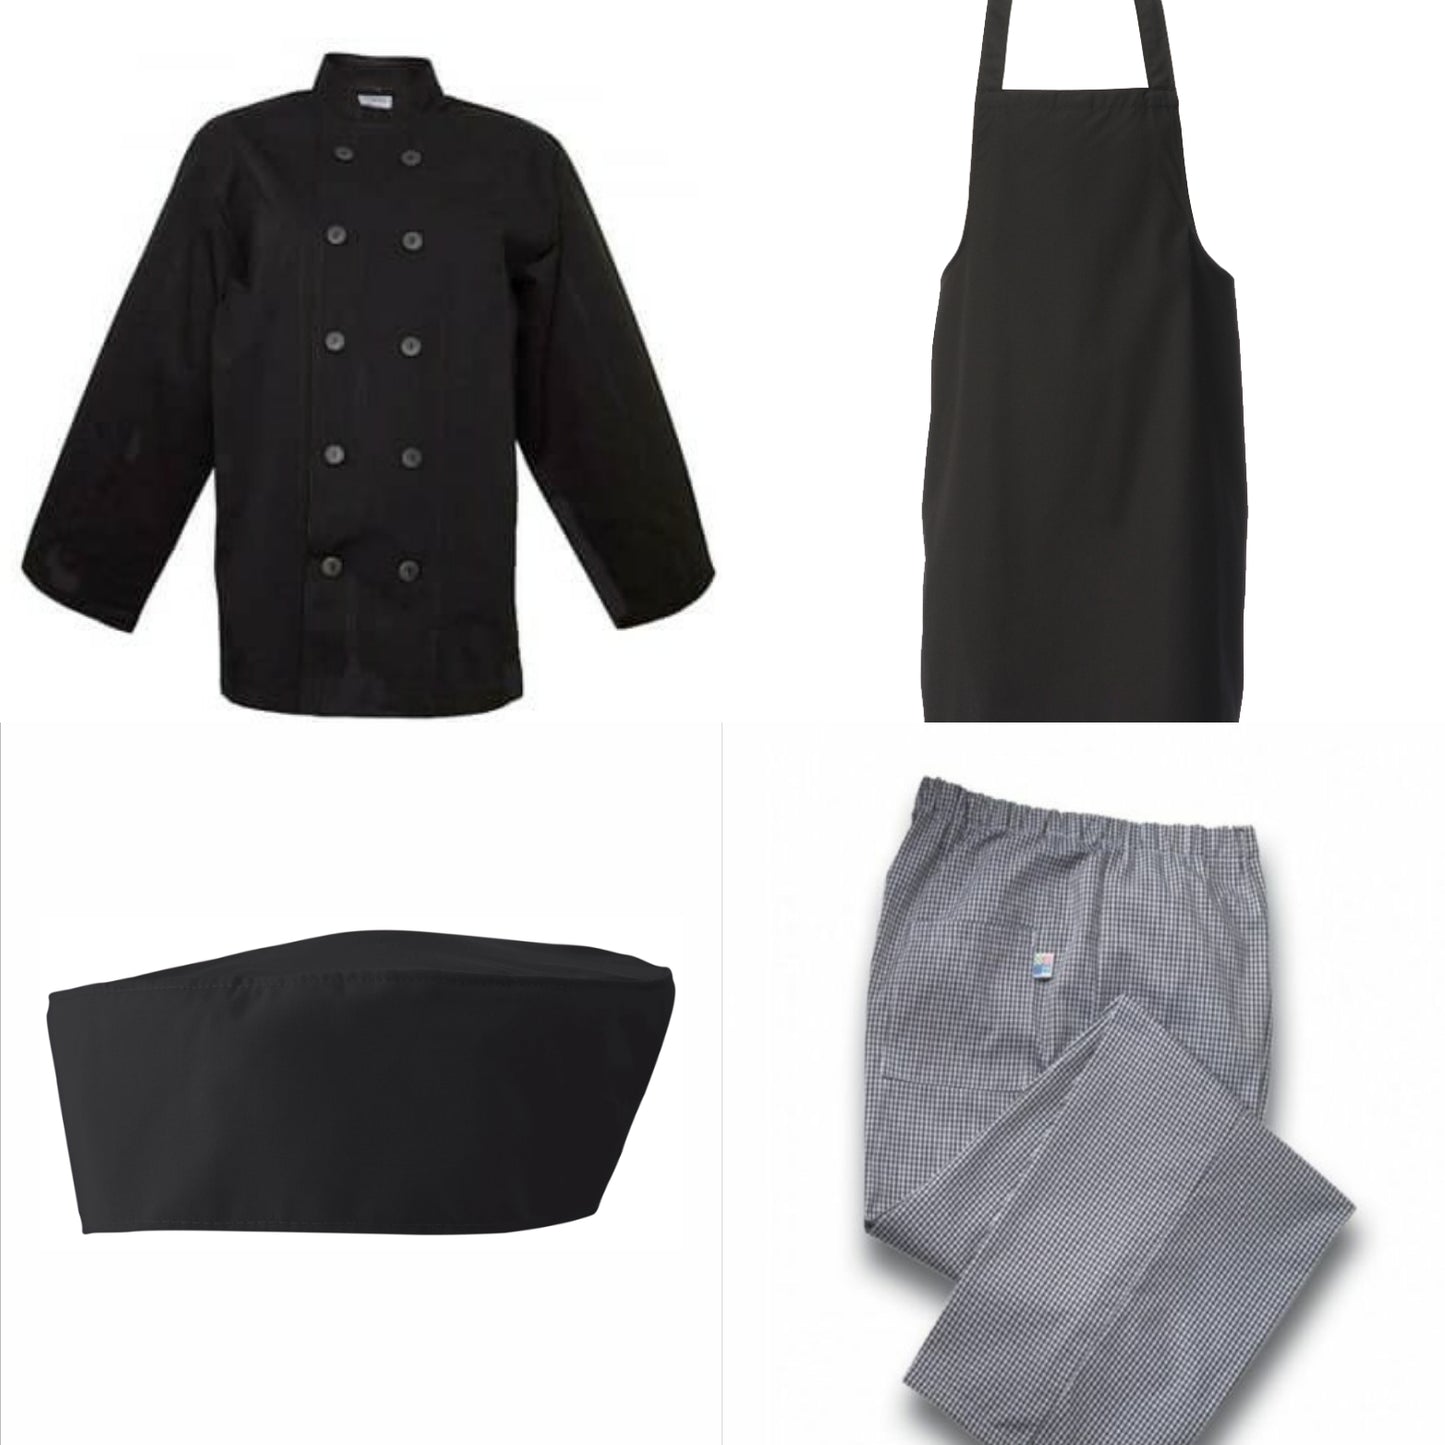 Complete Chef's Outfit - Black Jacket & Hat